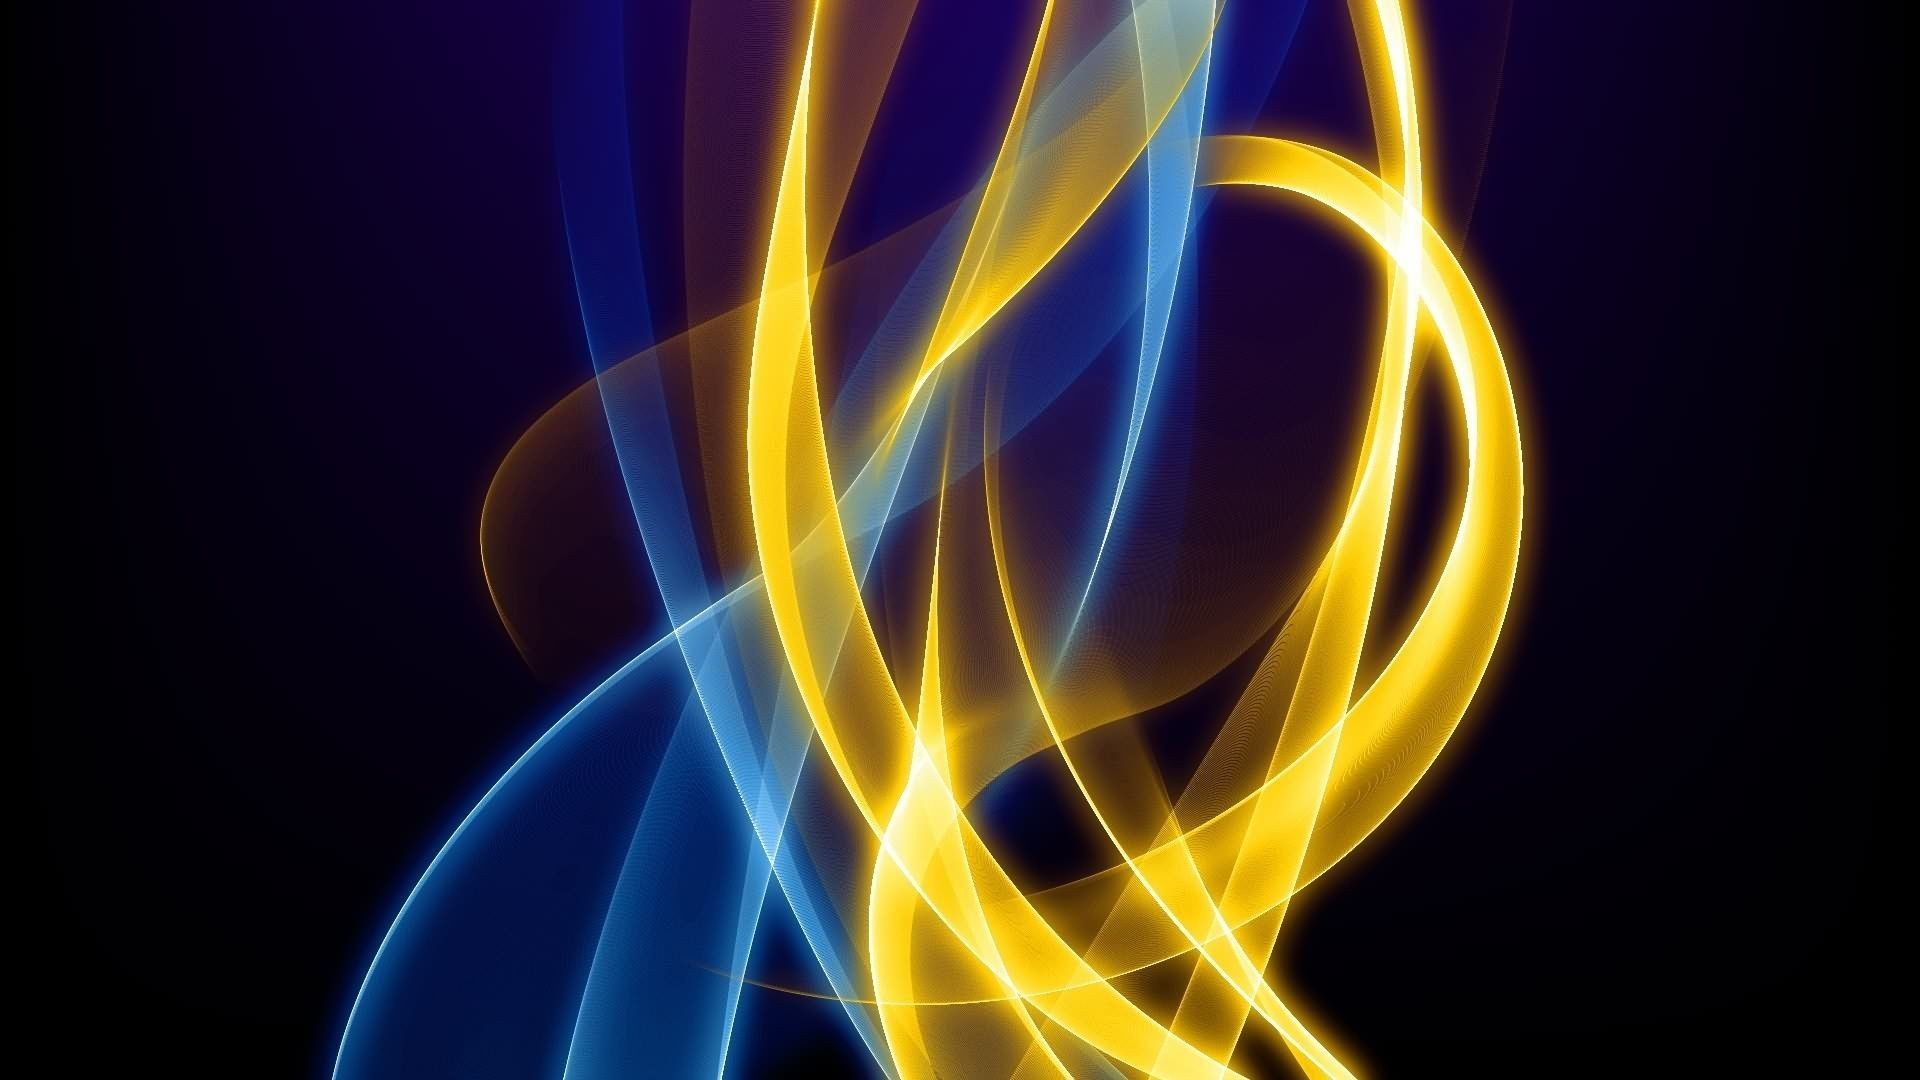 1920x1080 Blue and Gold Wallpapers Top Free Blue and Gold Backgrounds